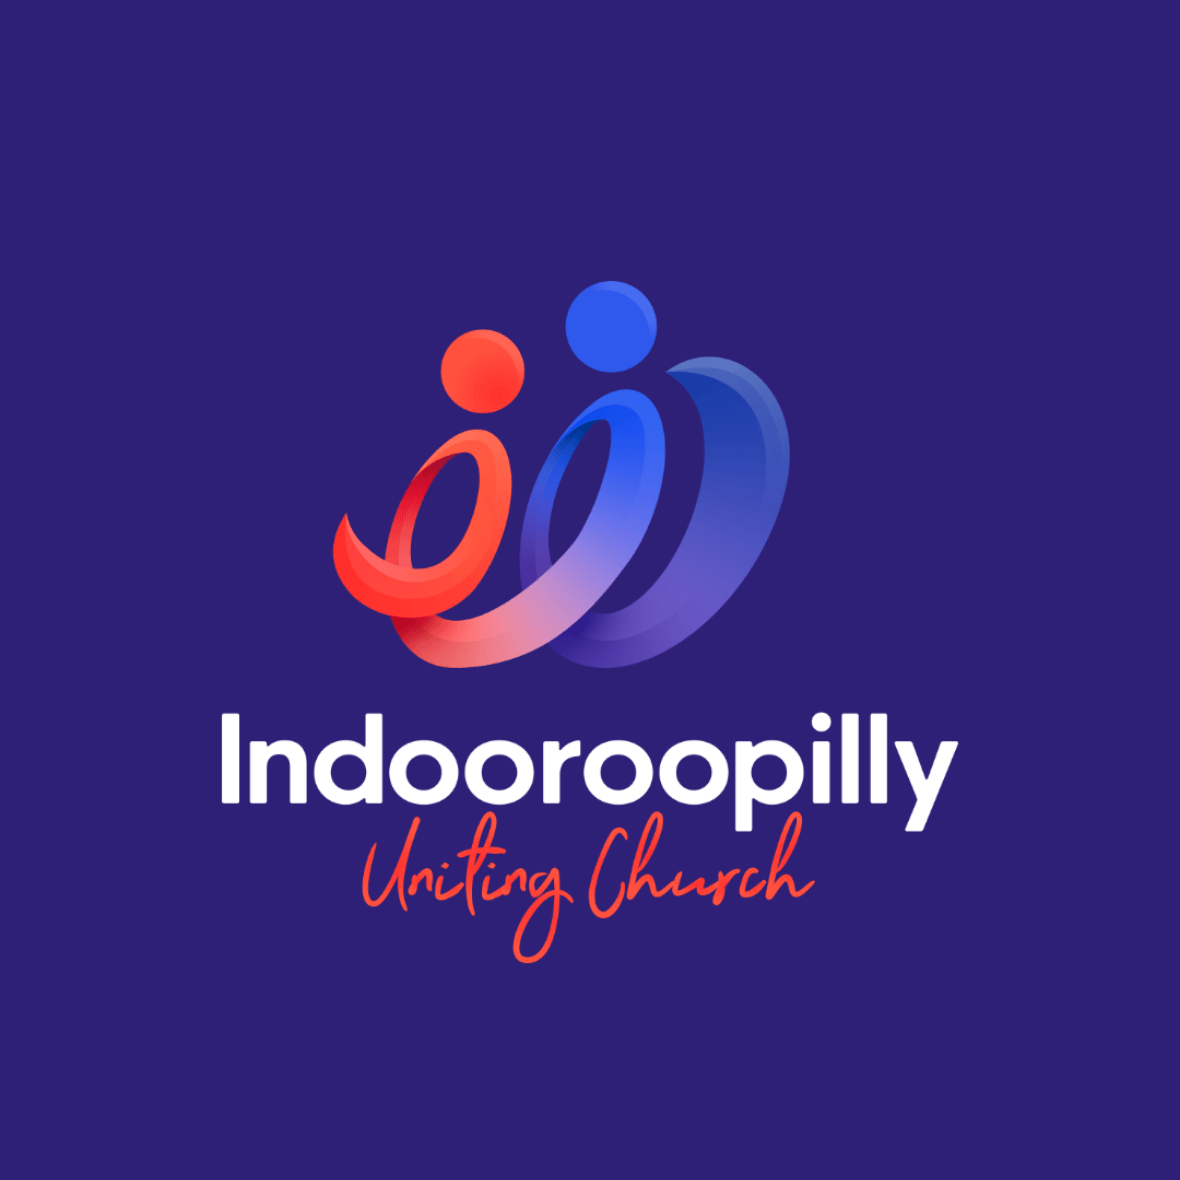 Indooroopilly Uniting Church Logo Design Concept